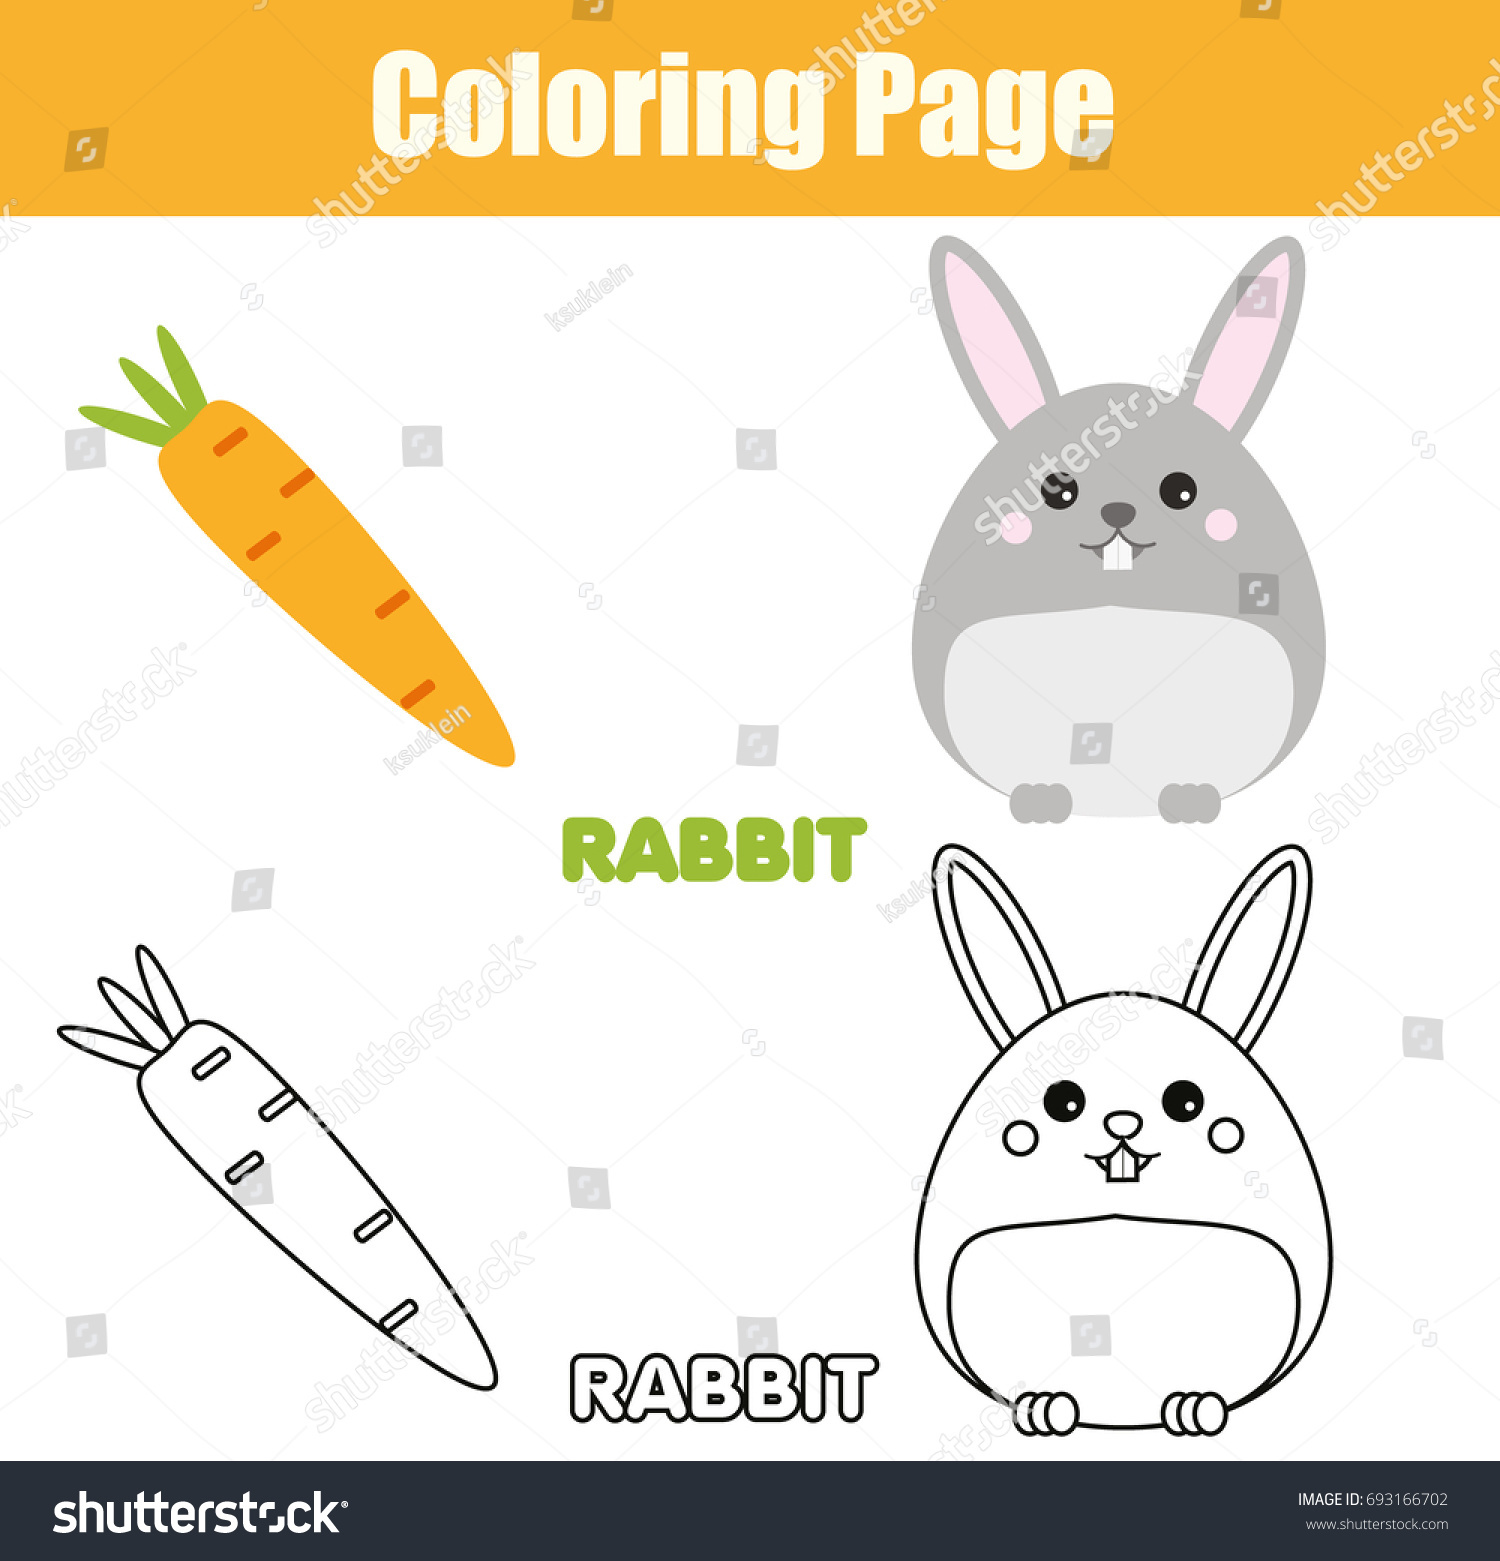 Coloring page with rabbit bunny character Color the picture drawing activity Educational game